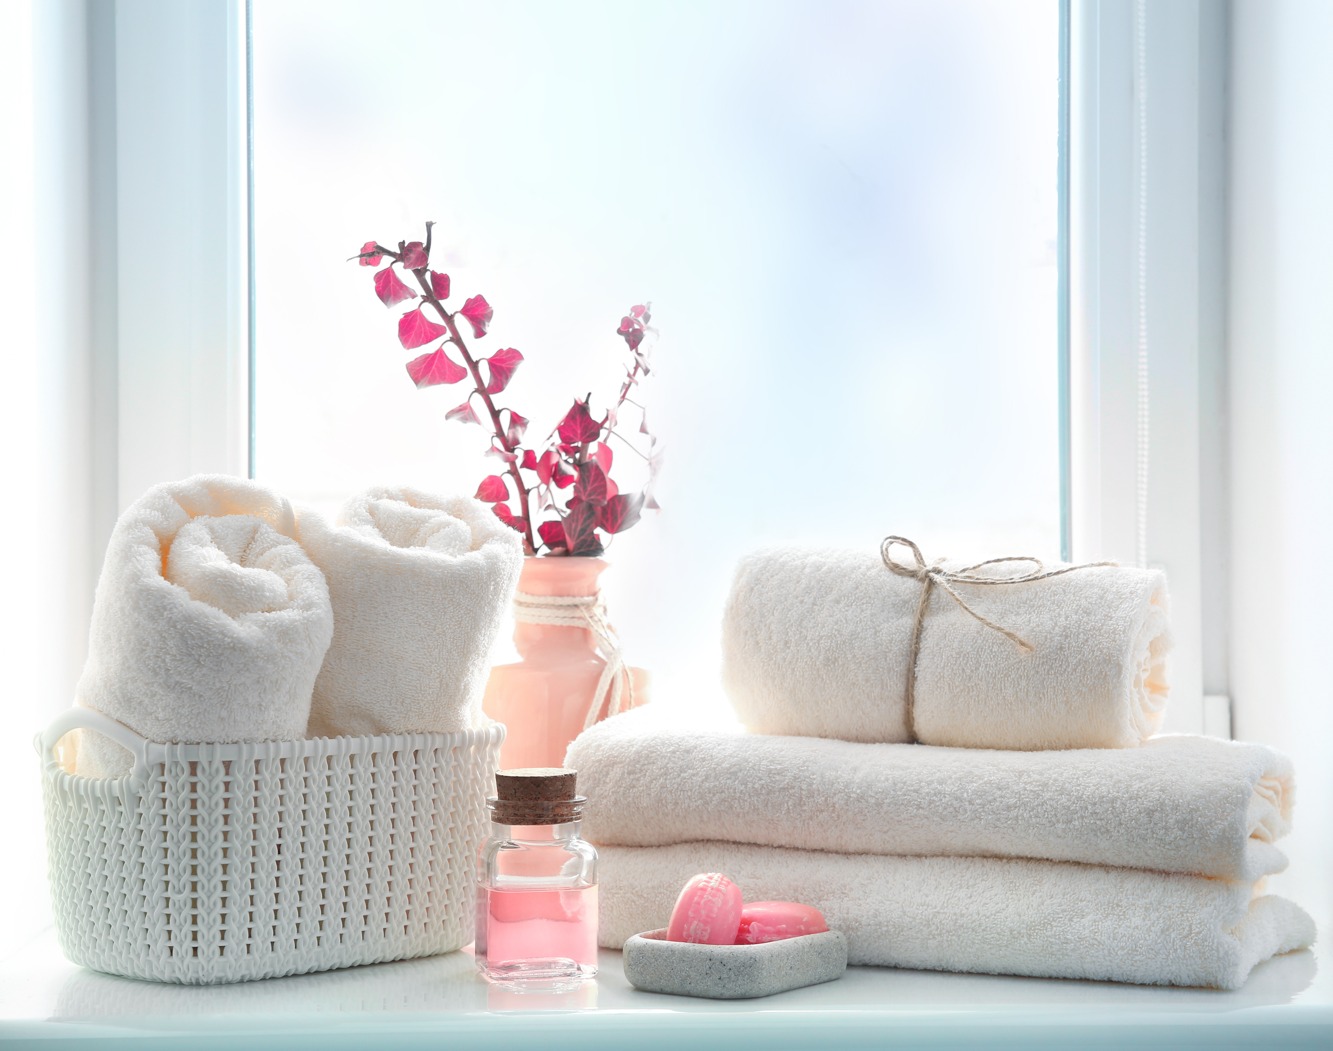 a set of towels with pink decorations such as candles soap and a vase around them